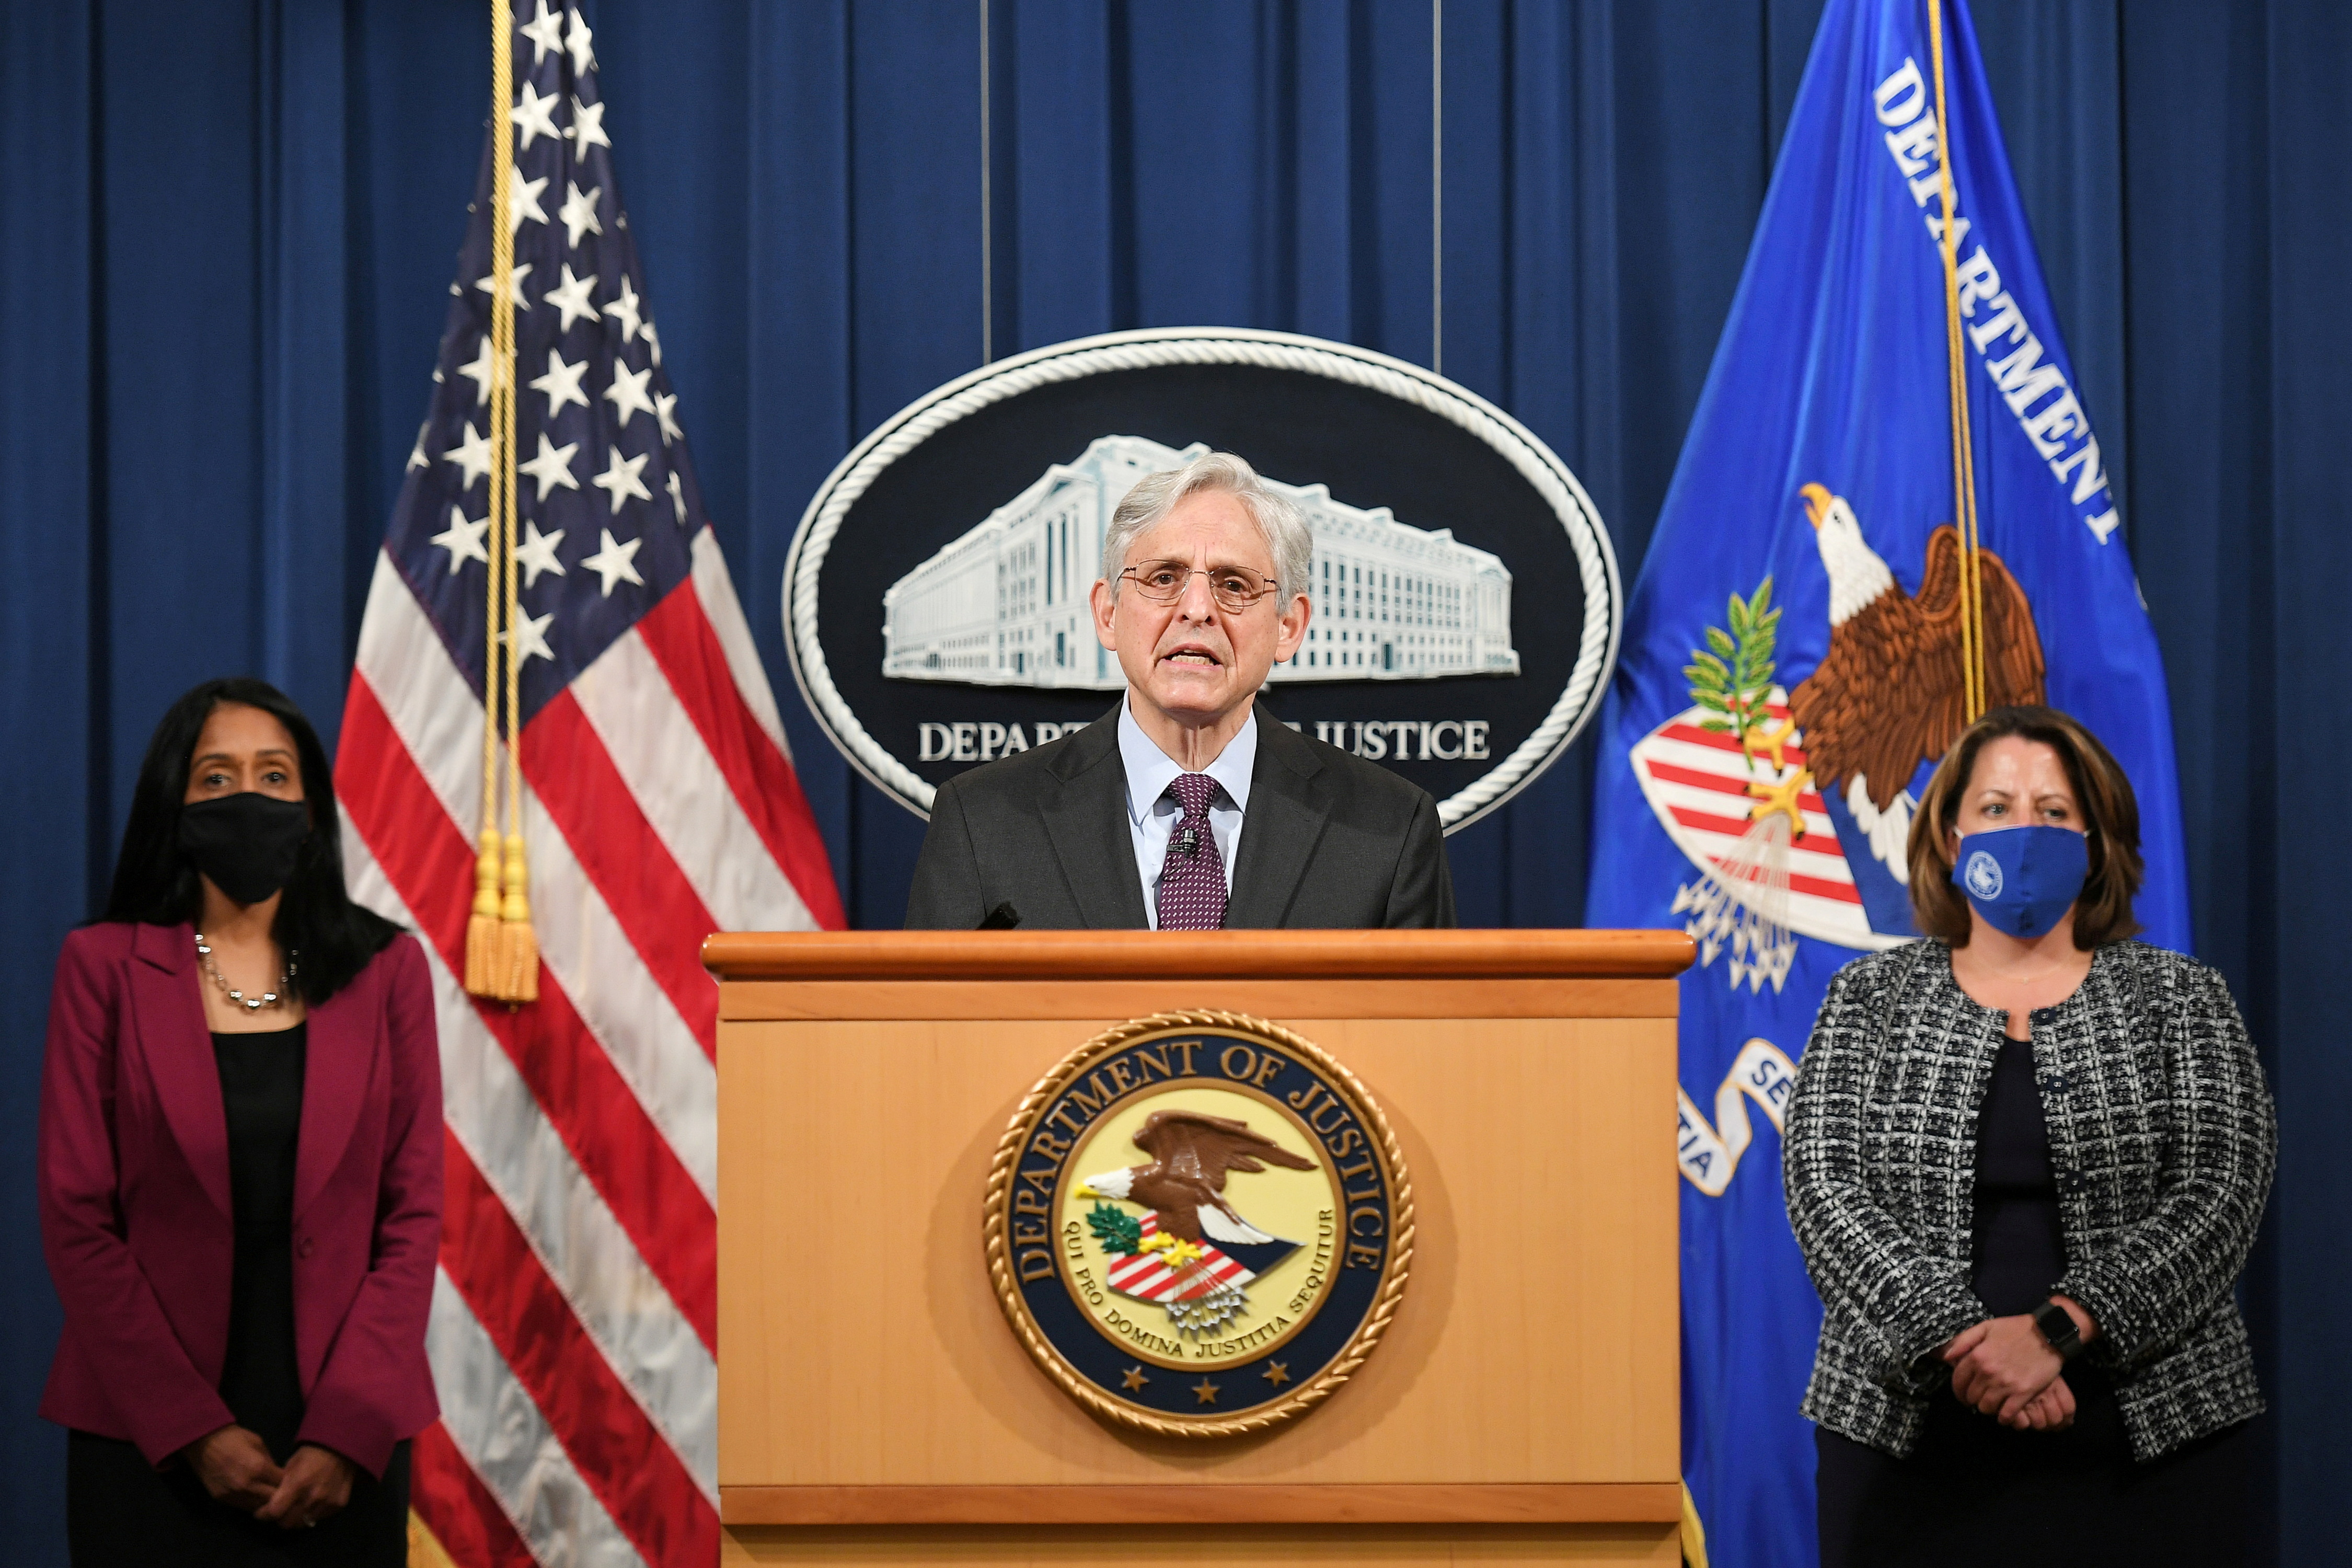 U.S. Attorney General Garland speaks at the Department of Justice in Washington